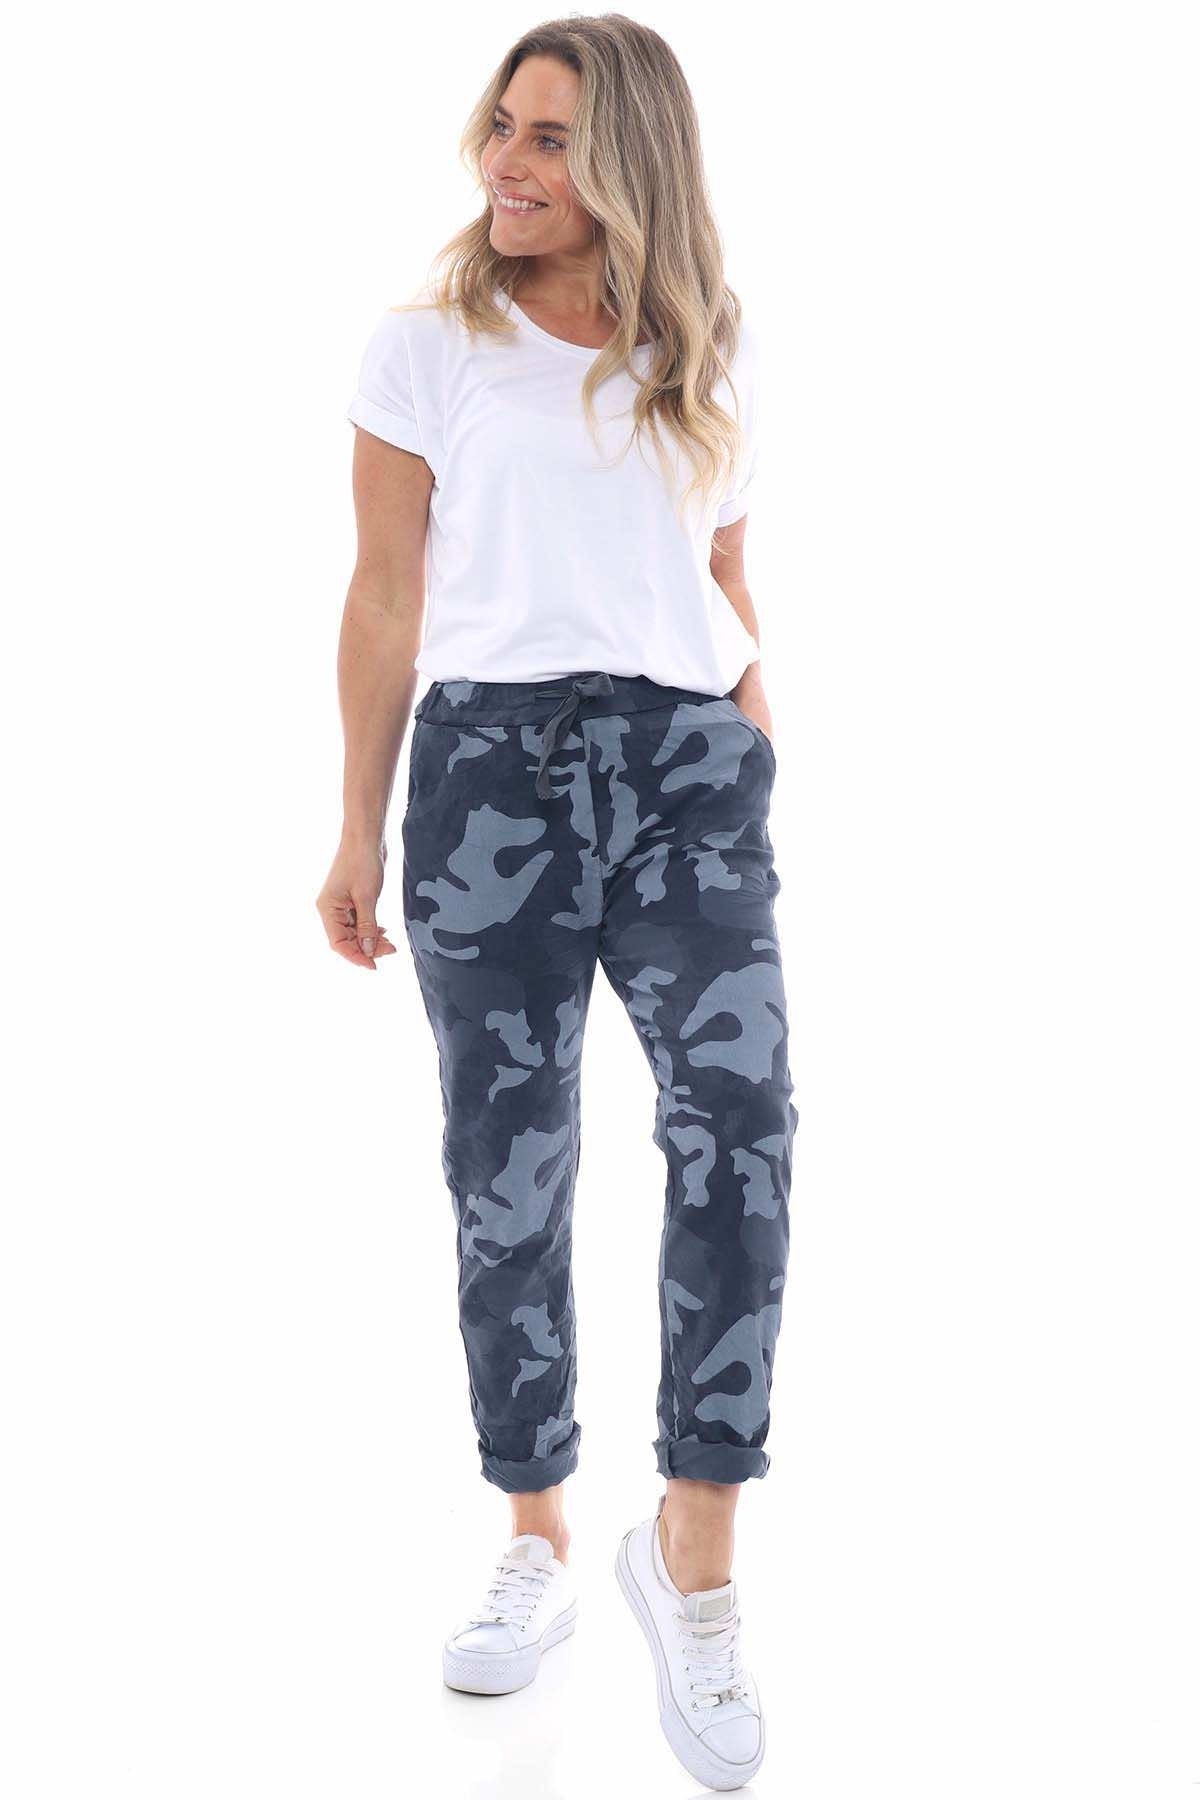 Yarwell Camouflage Print Joggers Charcoal